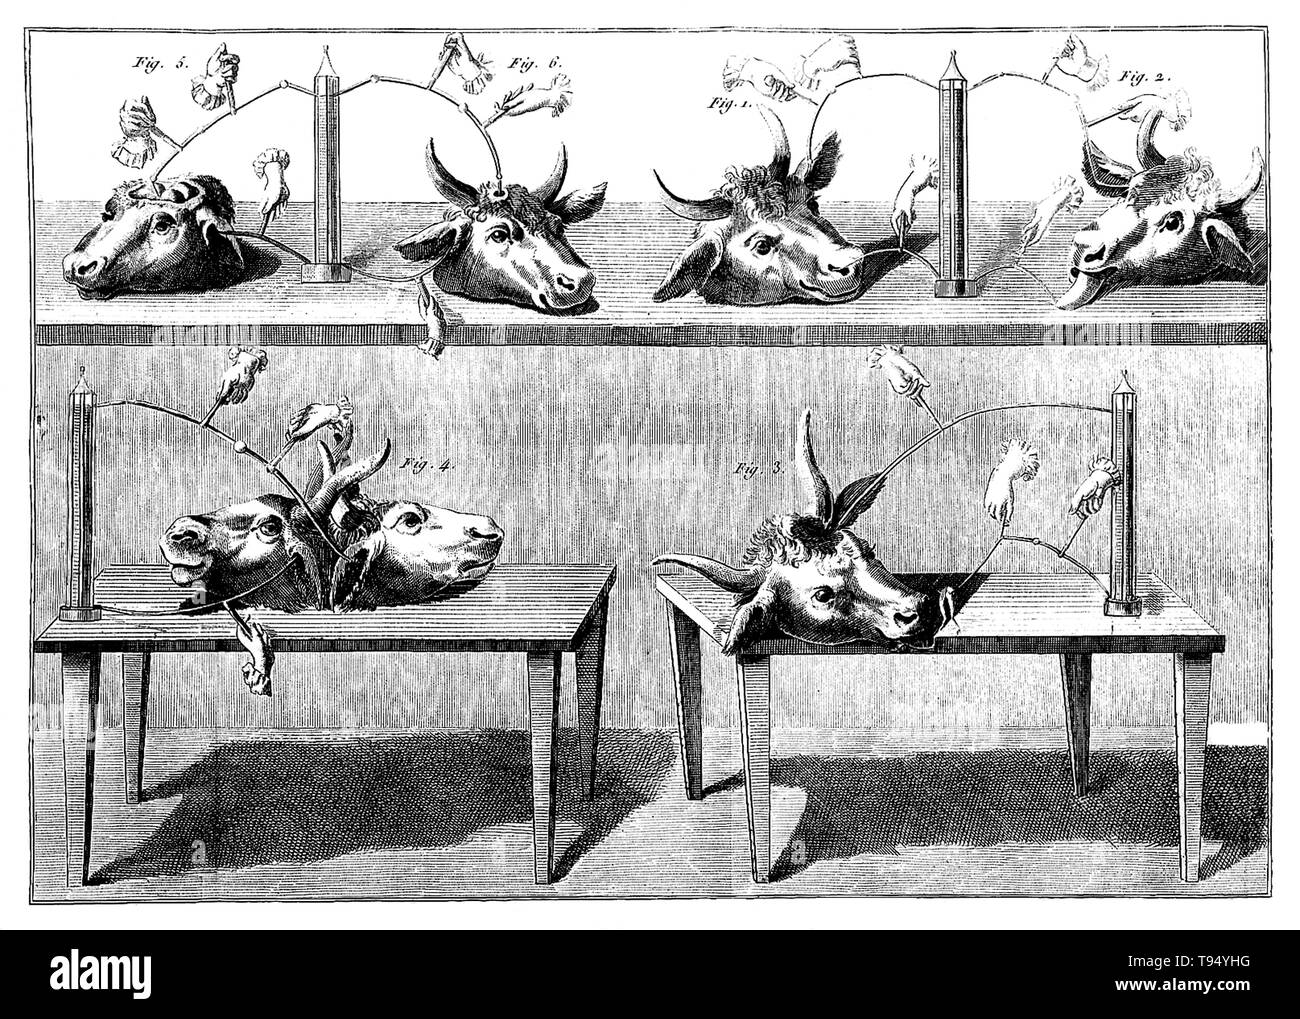 Galvanism experiments. Galvanism is the contraction of a muscle that is stimulated by an electric current. The effect was named after Luigi Galvani (September 9, 1737 - December 4, 1798), who investigated the effect of electricity on dissected animals in the 1780-90s. Giovanni Aldini (April 10, 1762 - January 17, 1834) was an Italian physicist and nephew of Galvani. Stock Photo